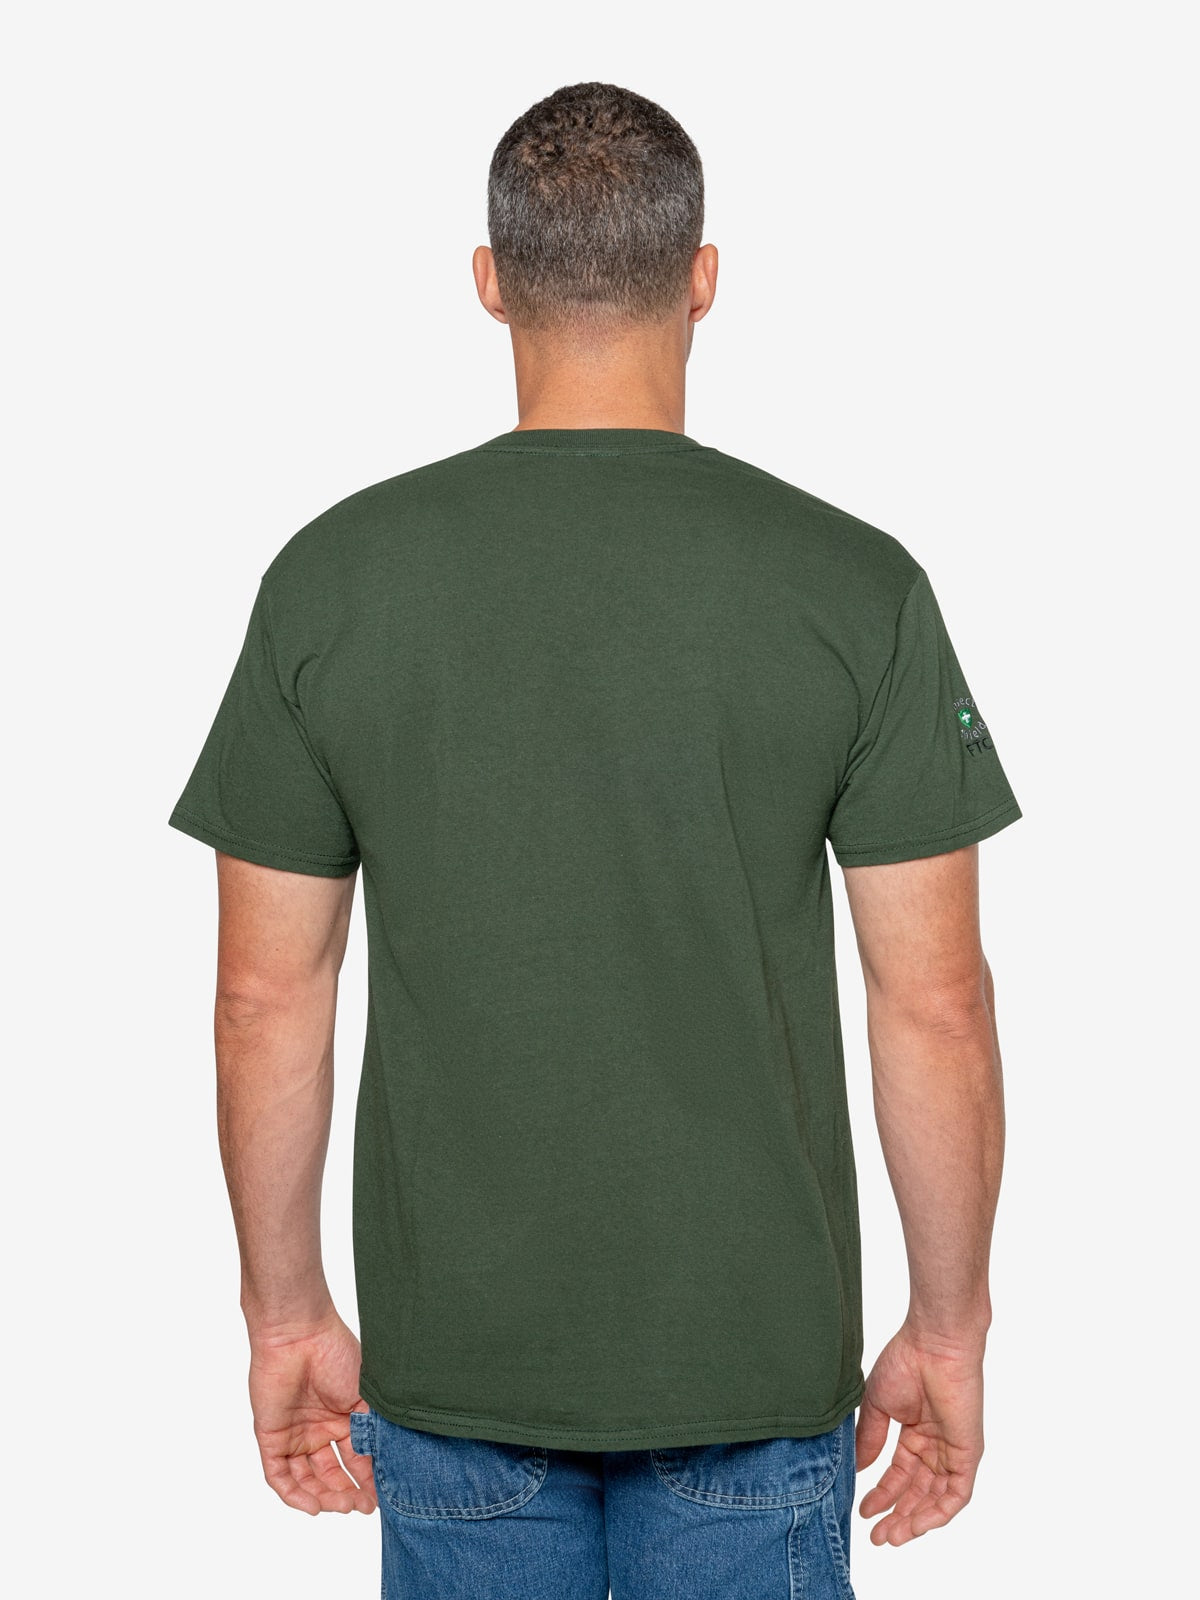 Men's Insect Repellent Short Sleeve T-Shirt | Protects Against Bites ...